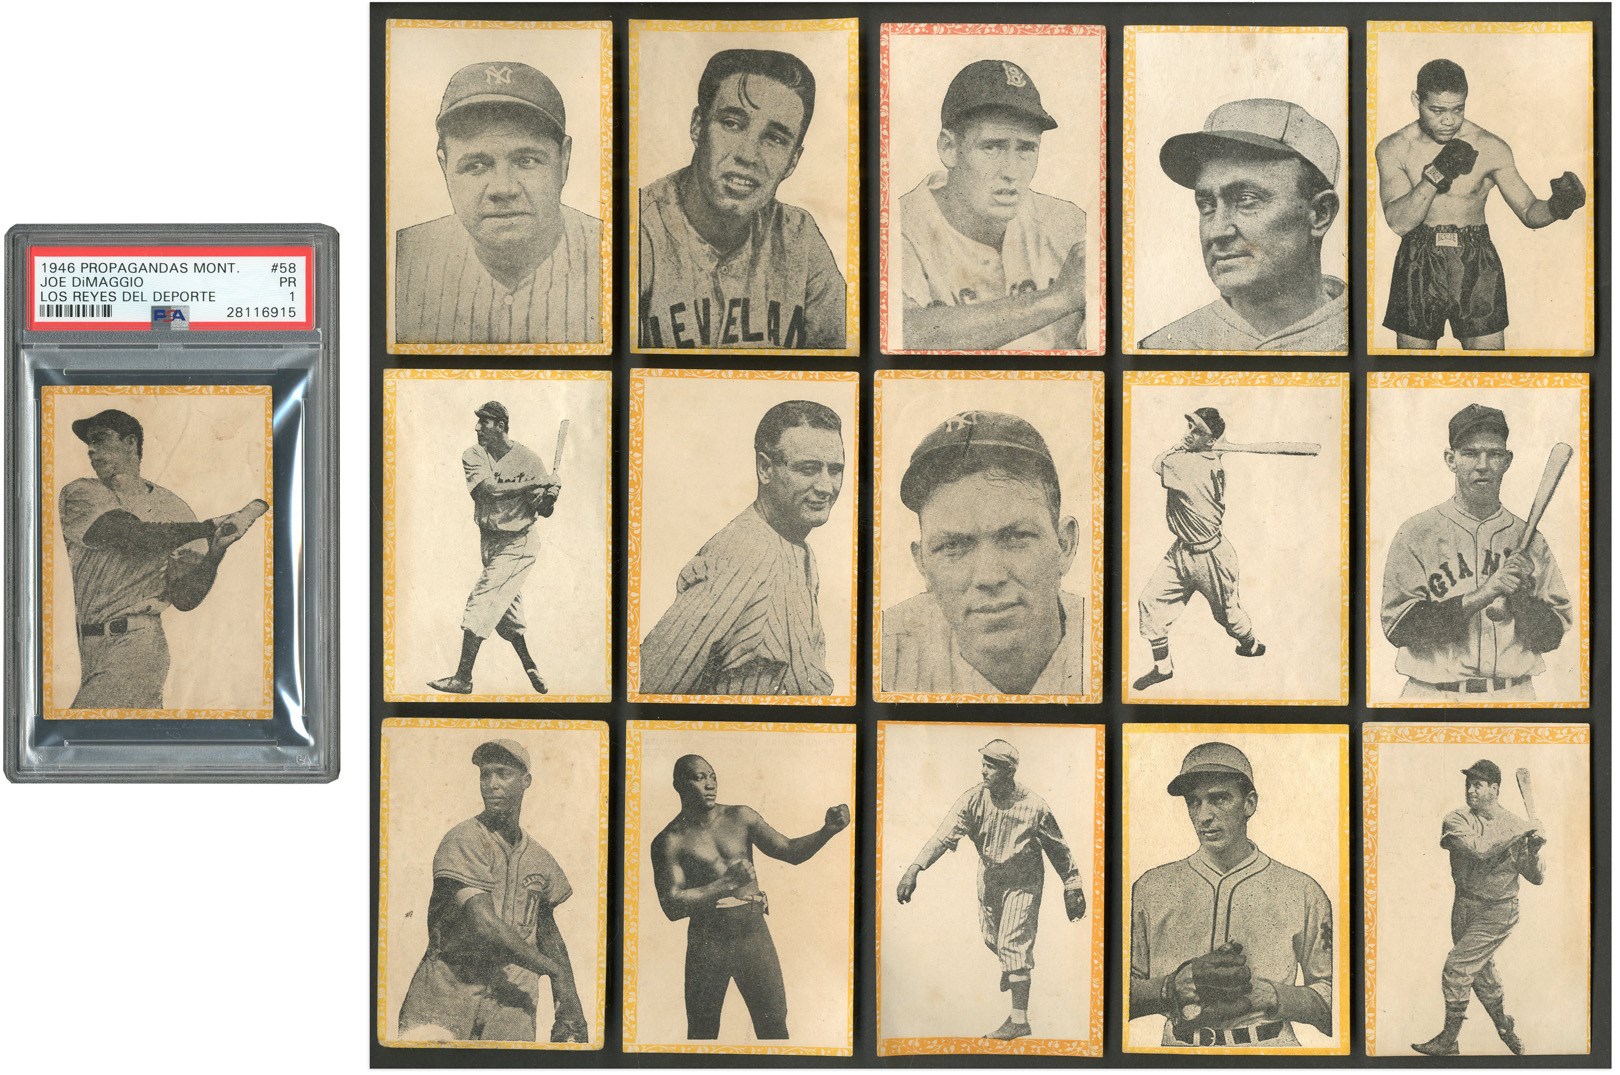 Baseball and Trading Cards - 1946 Propagandas Montiel Collection of 163 Cards with Ruth, Gehrig, DiMaggio